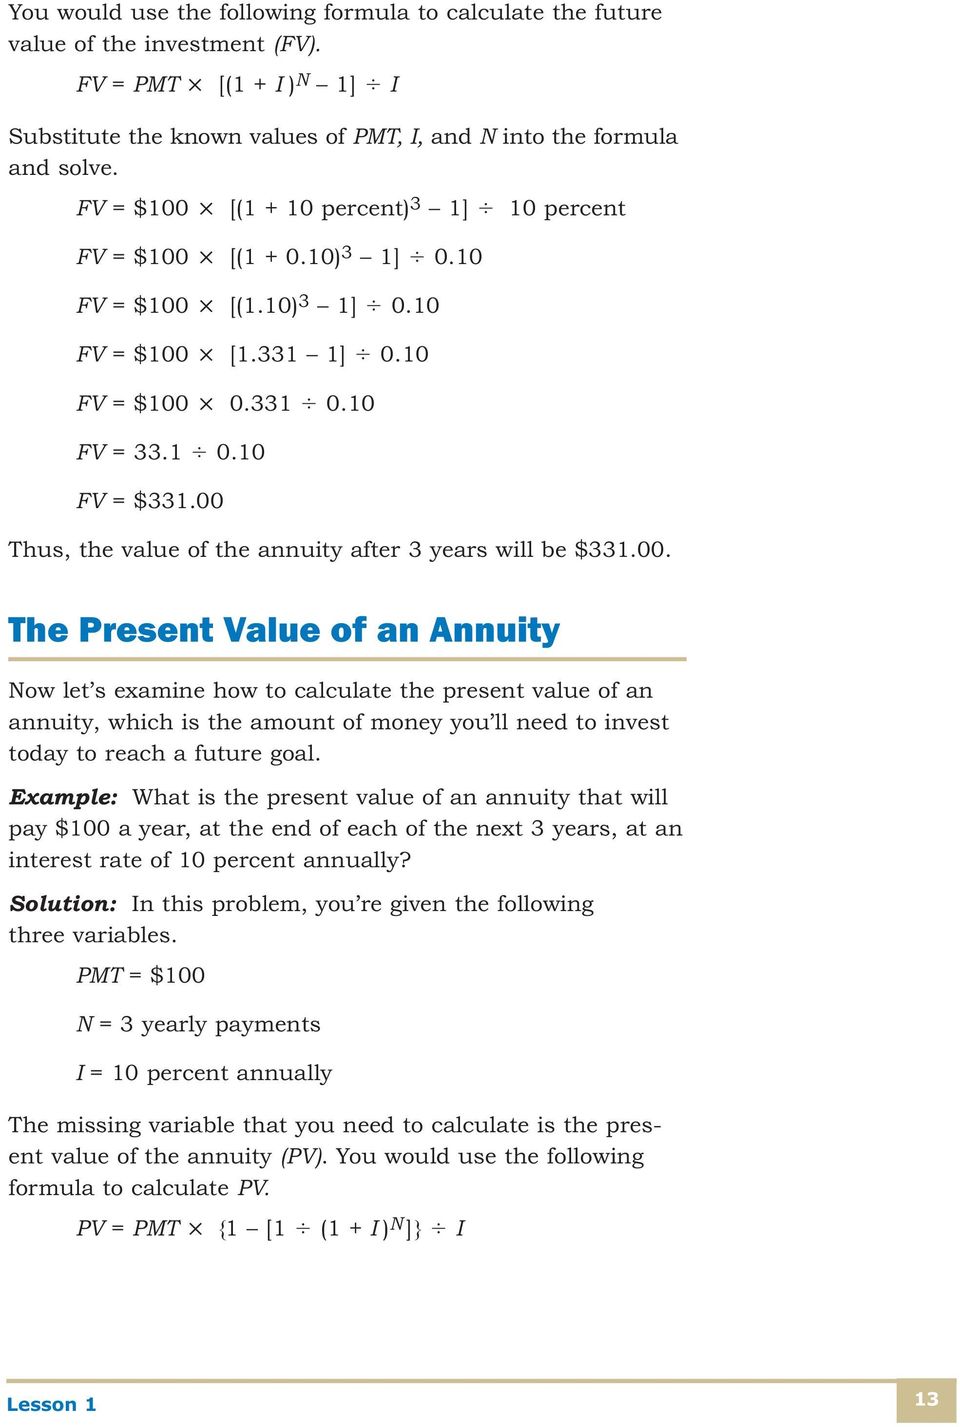 00 Thus, the value of the annuity after 3 years will be $331.00. The Present Value of an Annuity Now let s examine how to calculate the present value of an annuity, which is the amount of money you ll need to invest today to reach a future goal.